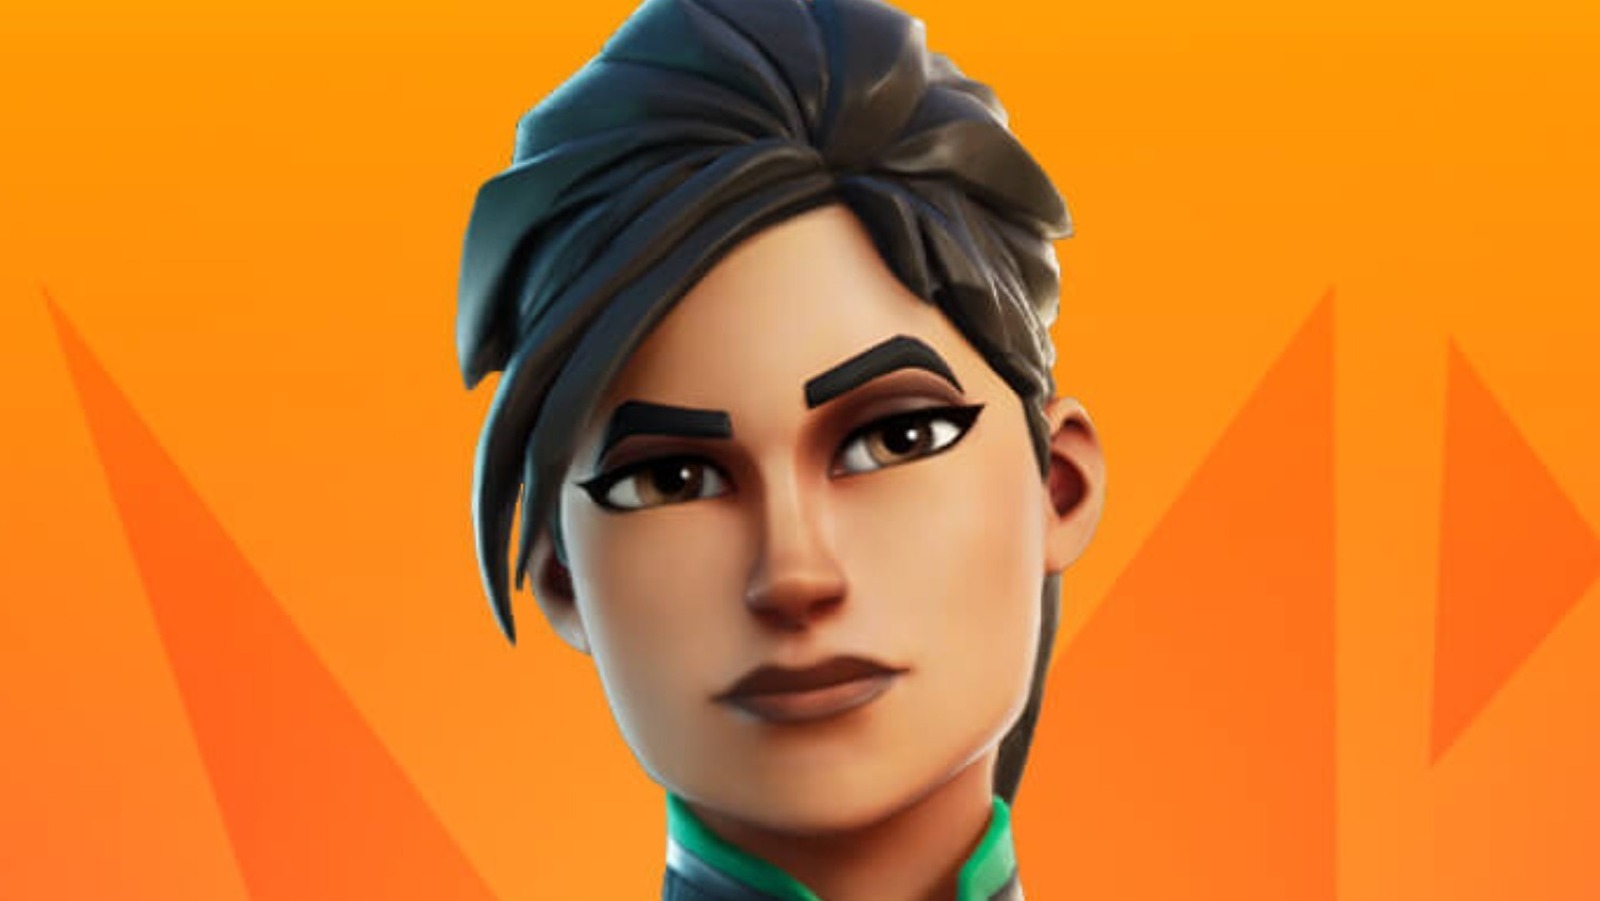 Does Playing As Agirl In Fortnite Give An Advtnage The Real Reason Pros Use Female Character Skins In Fortnite